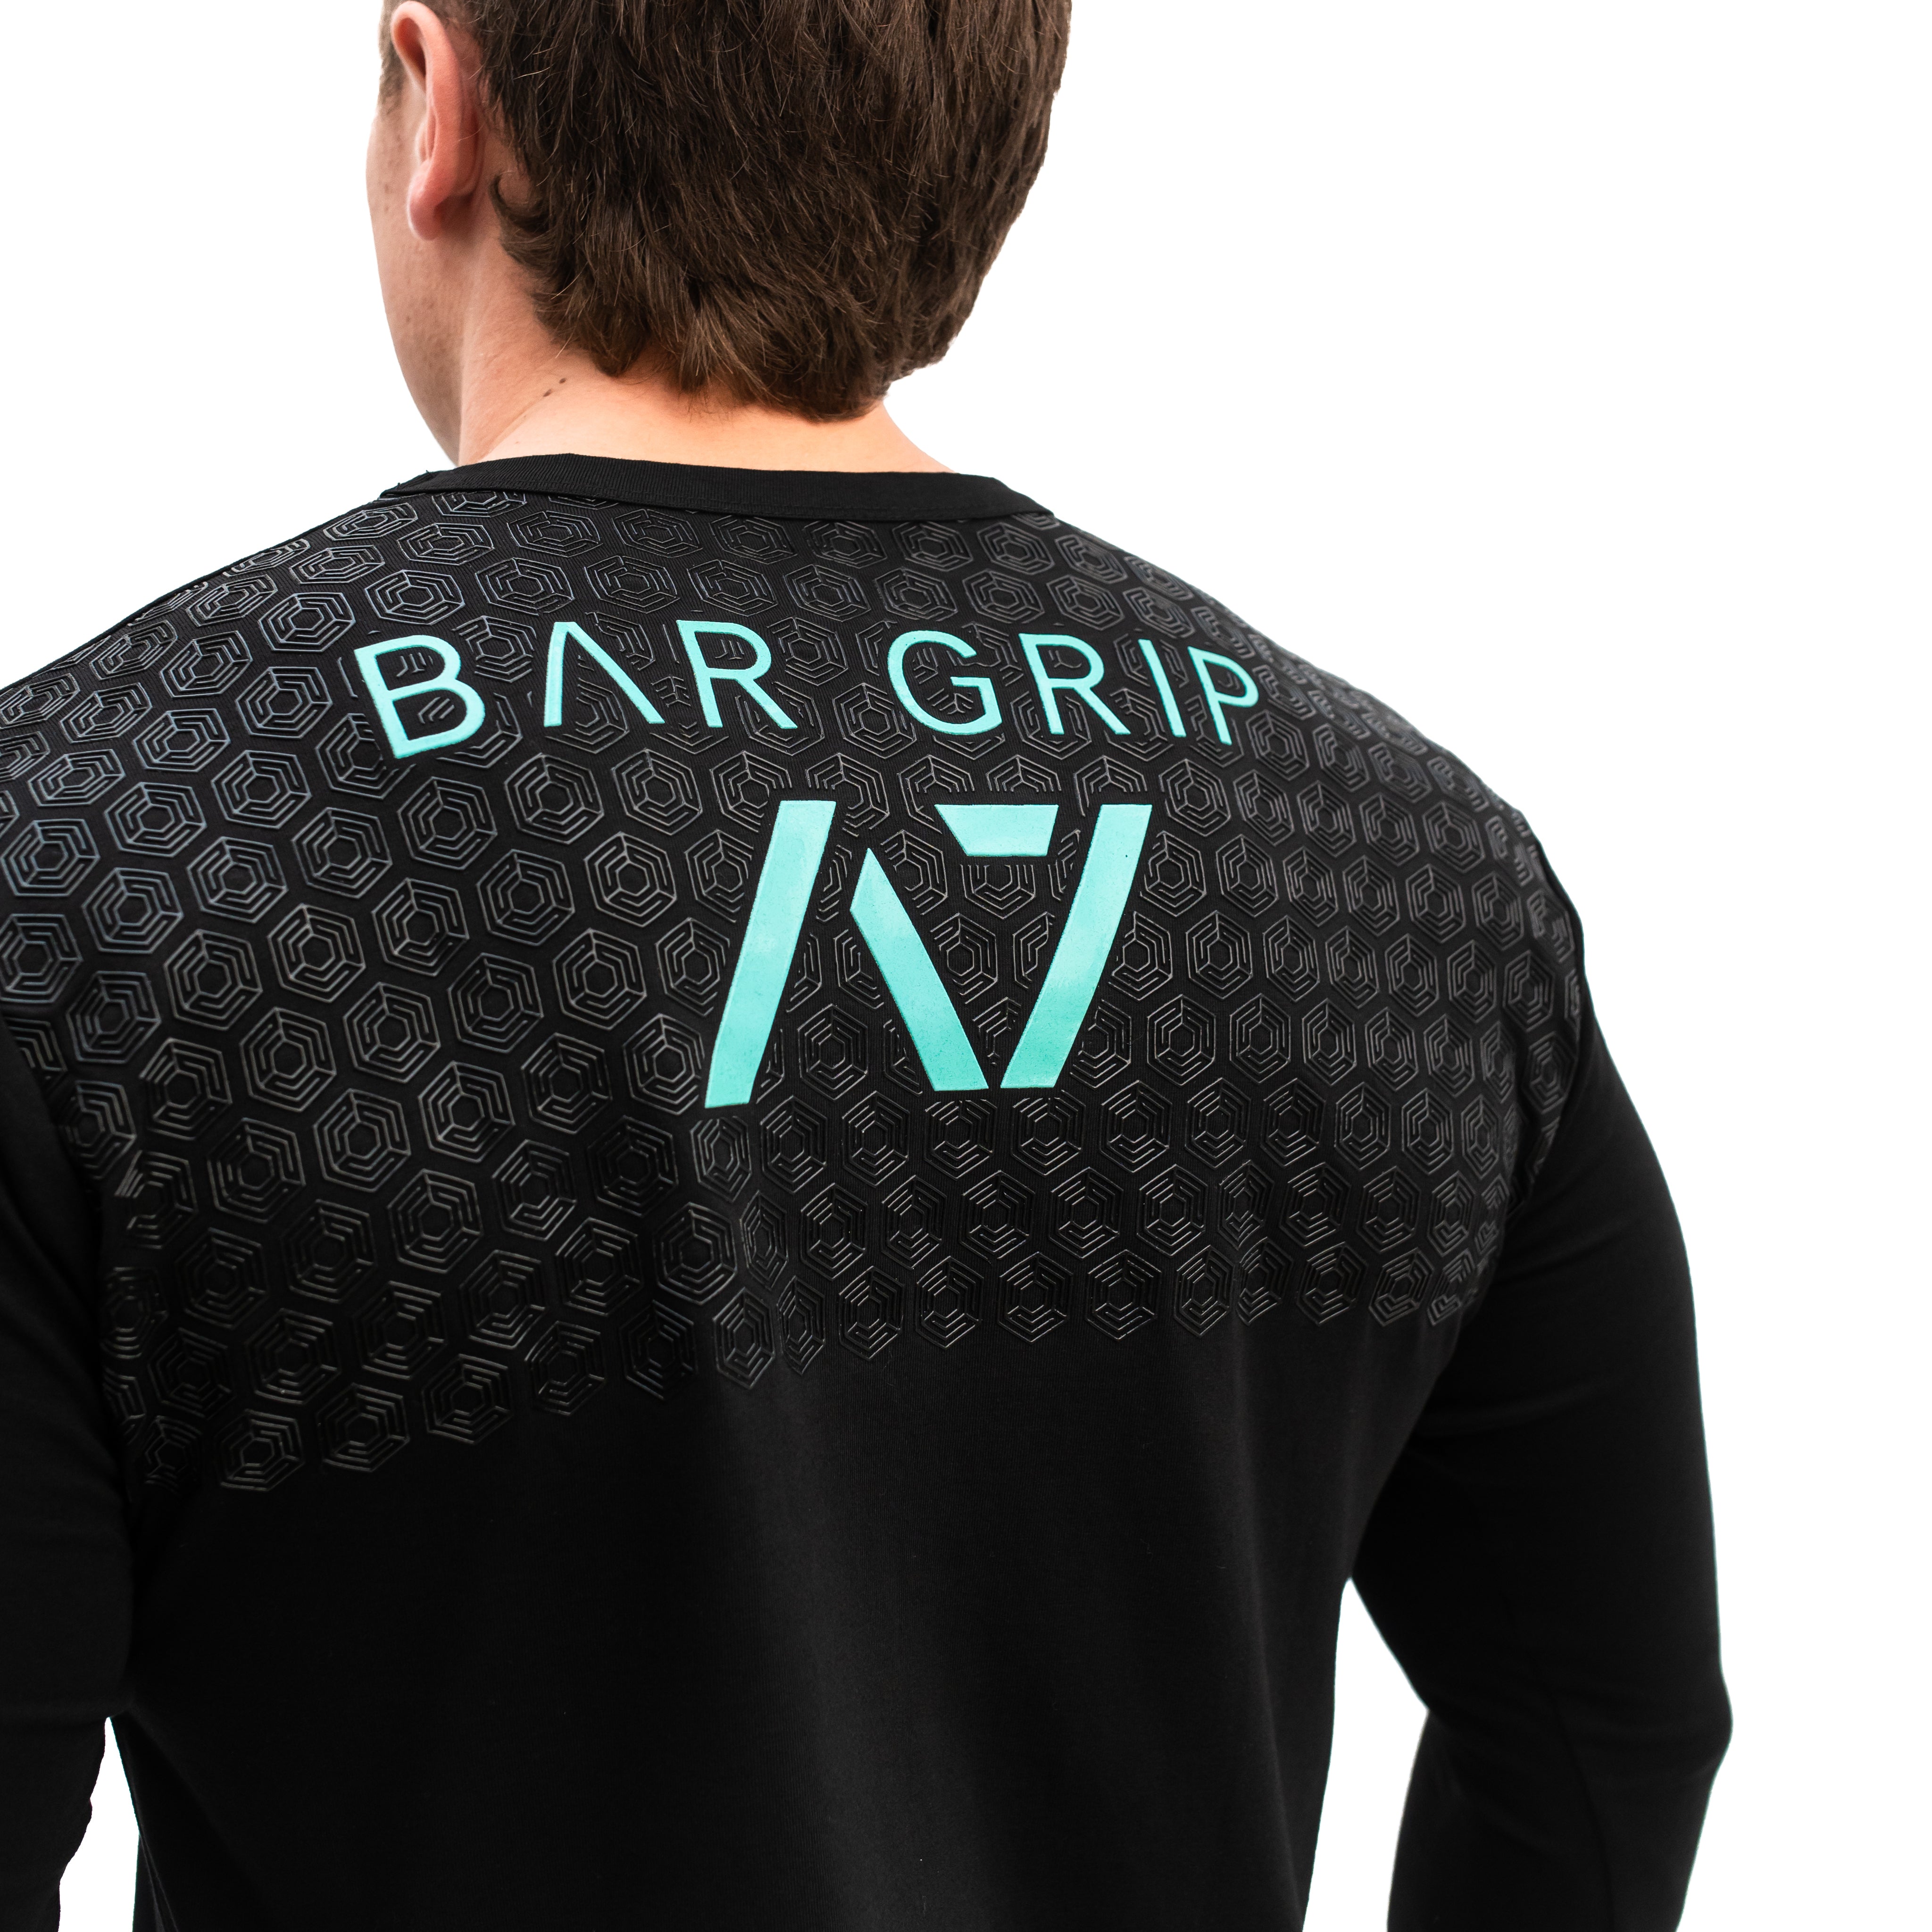  Kilos and Barbells Aqua Bar Grip keeps you warm in the gym. Purchase Kilos and Barbells Aqua Long Sleeve Bar Grip from A7 UK and A7 Europe. The silicone grip helps with slippery commercial benches and bars and anchors the barbell to your back. Kilos and Barbells Aqua Long Sleeve Bar Grip is great for training in a cold gym. A7UK has the best Powerlifting apparel for all your workouts. Available in UK and Europe including France, Italy, Germany, the Netherlands, Sweden and Poland.